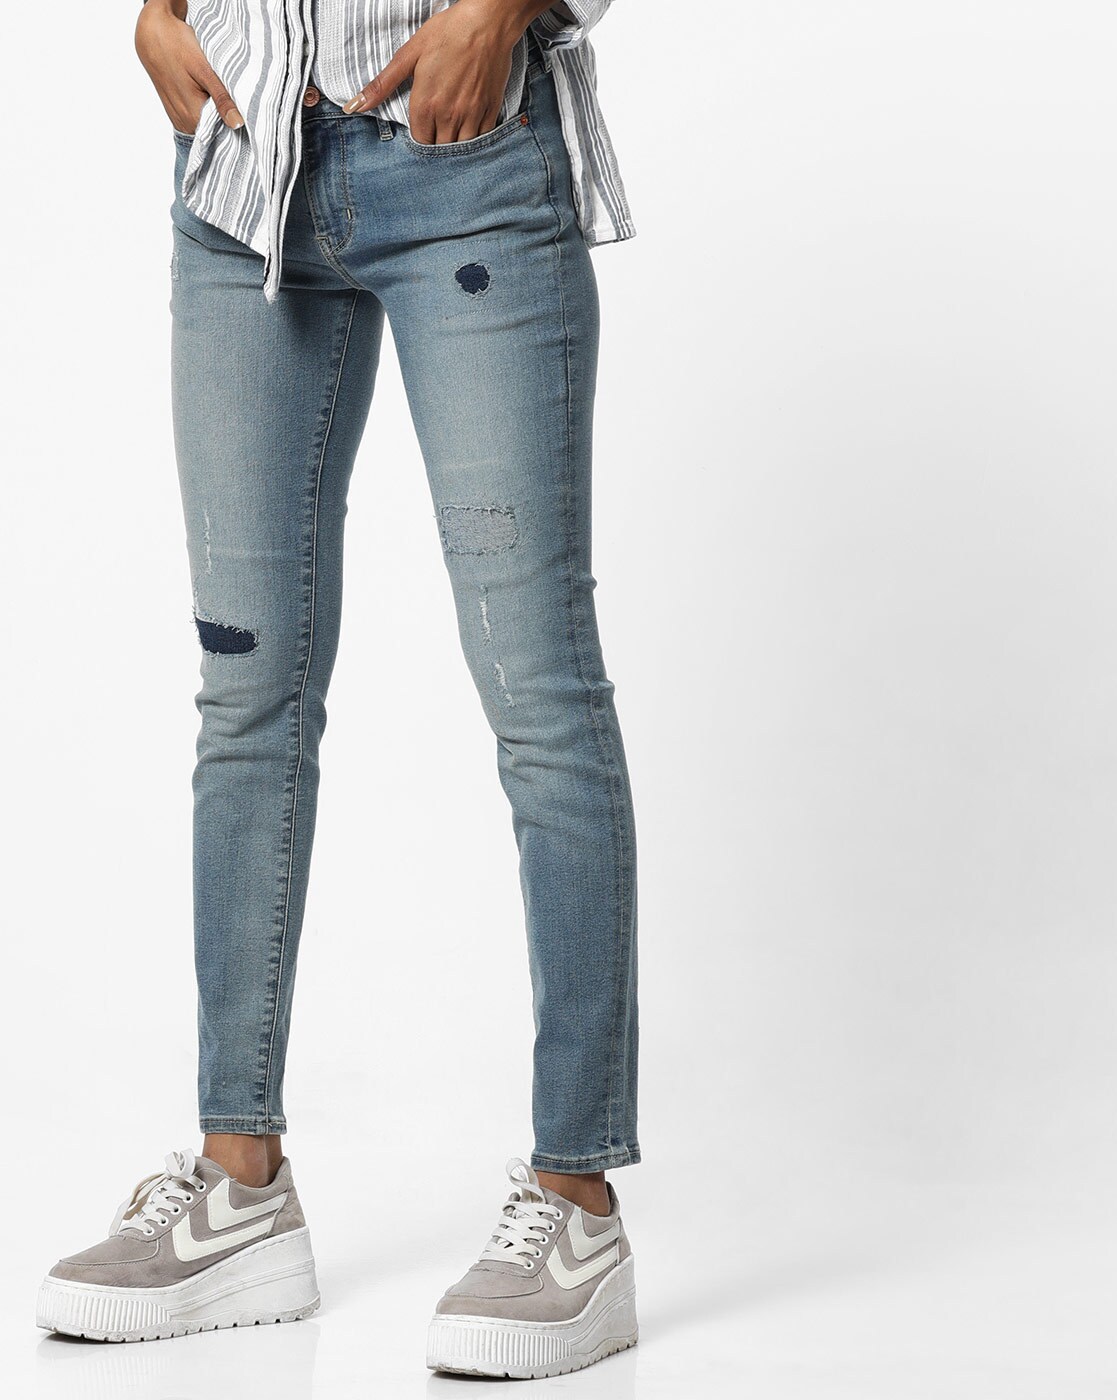 levis destroyed jeans womens